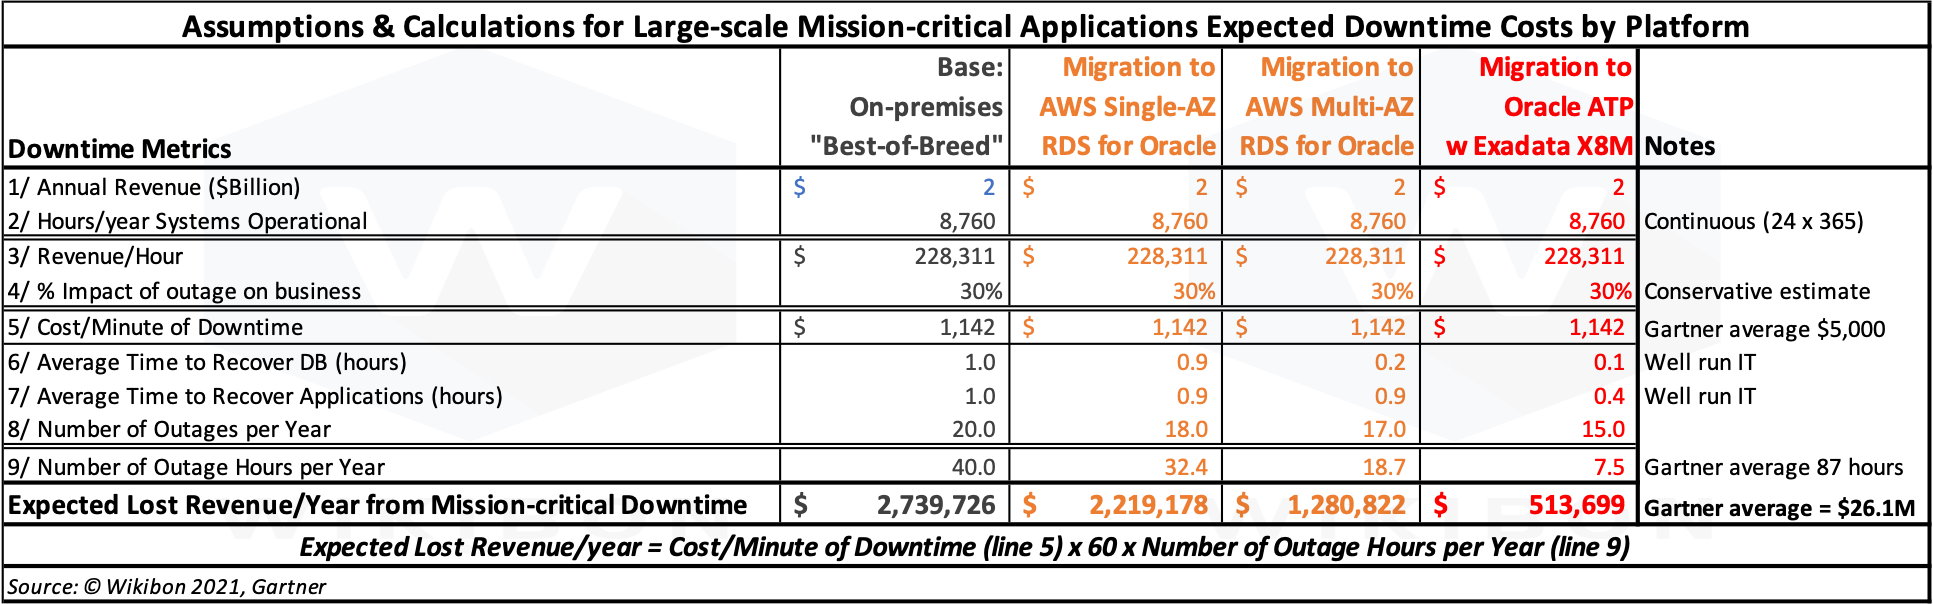 Calculations & Assumptions for Downtime Costs